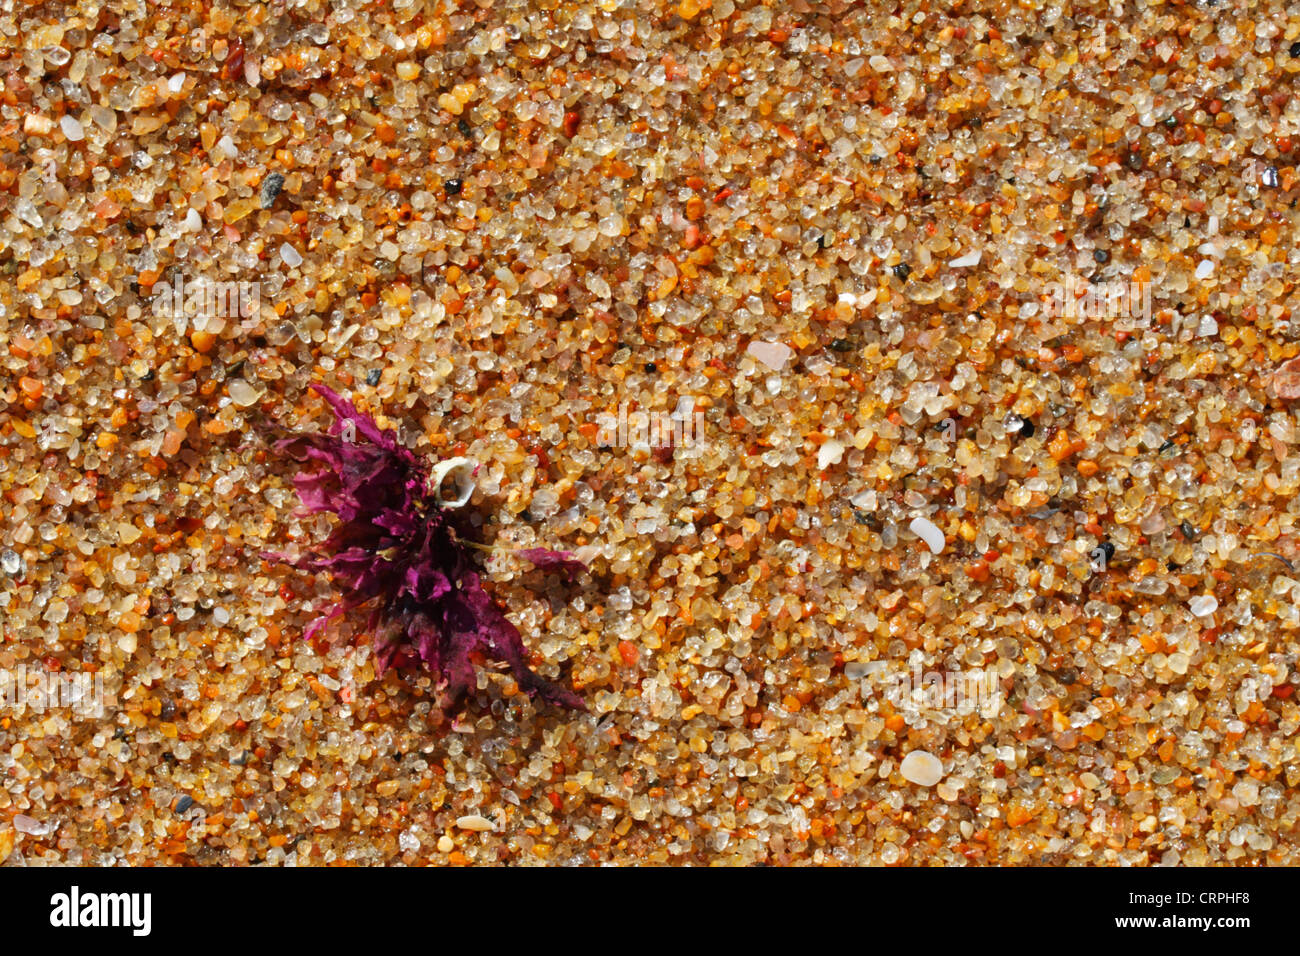 Abstract of red seaweed on golden beach sand Stock Photo